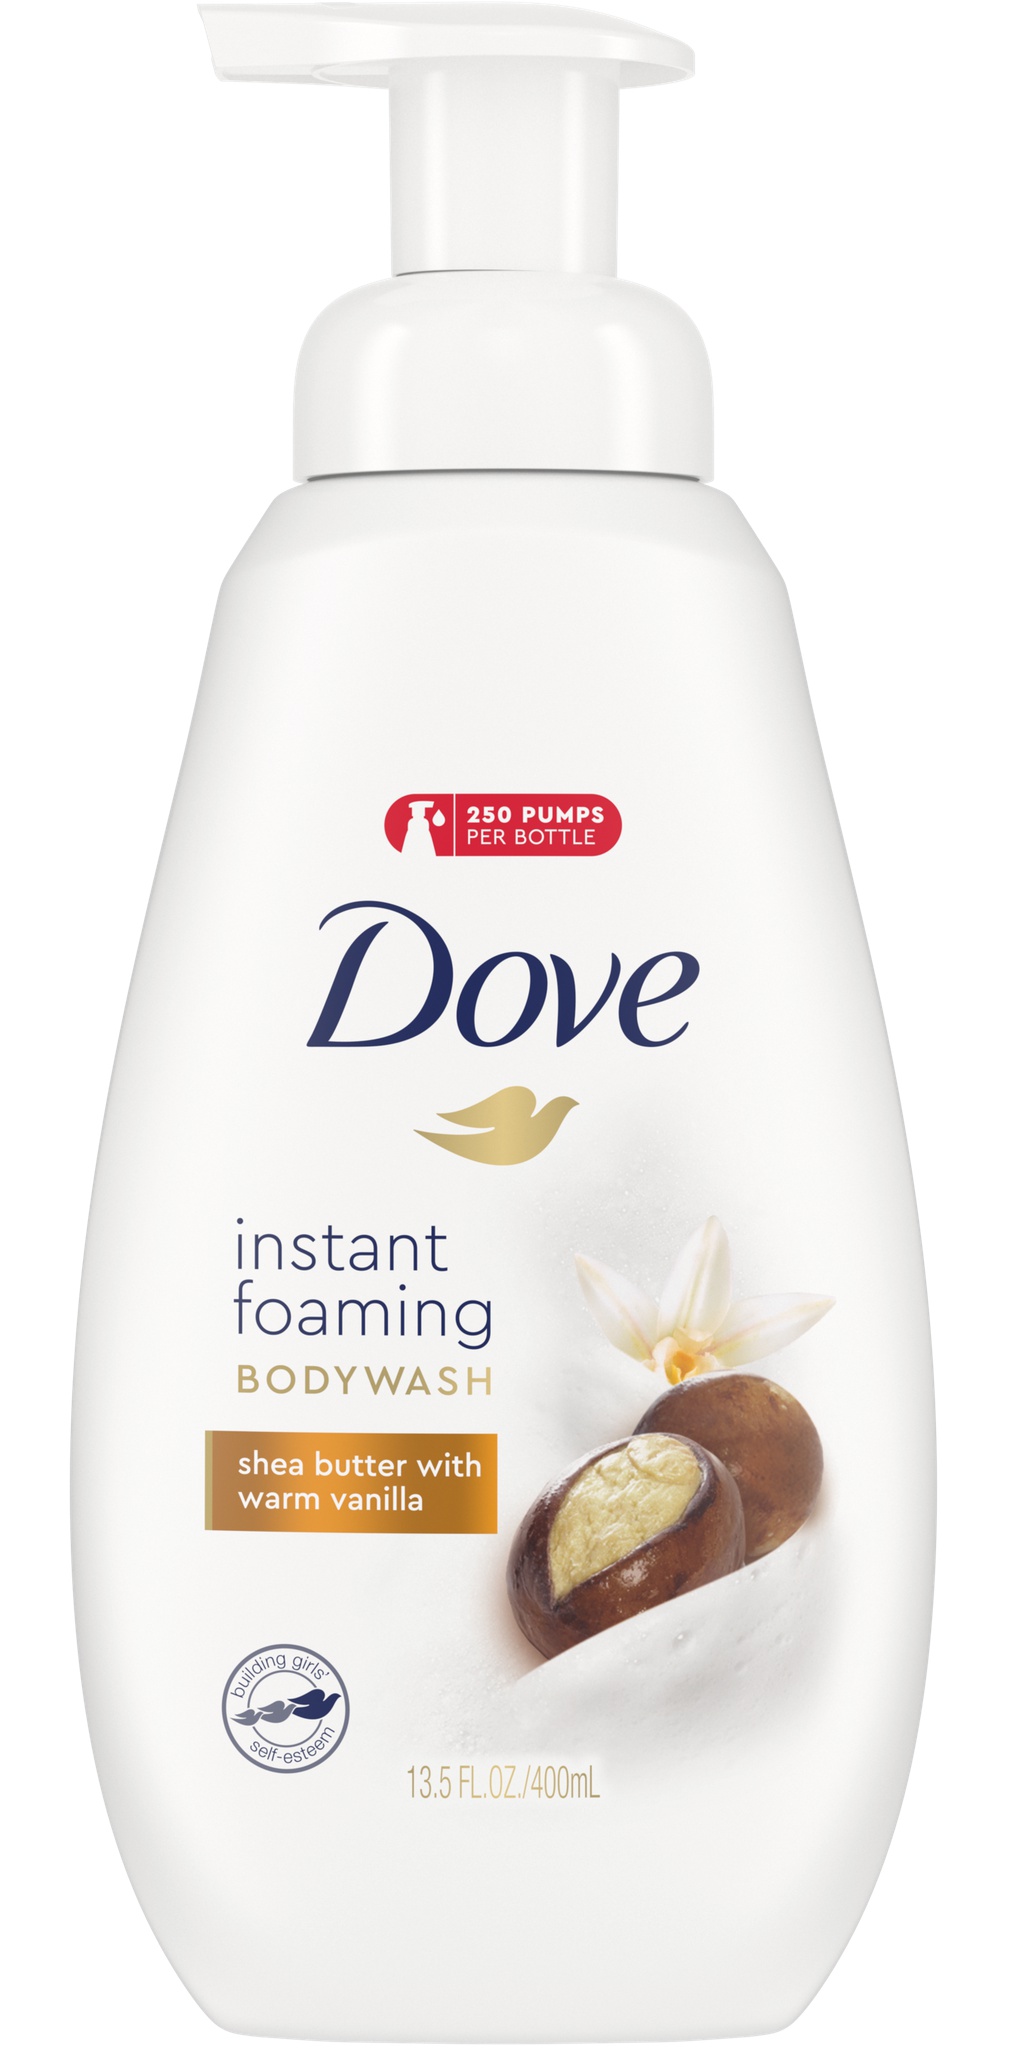 Dove Instant Foaming Body Wash Shea Butter With Warm Vanilla